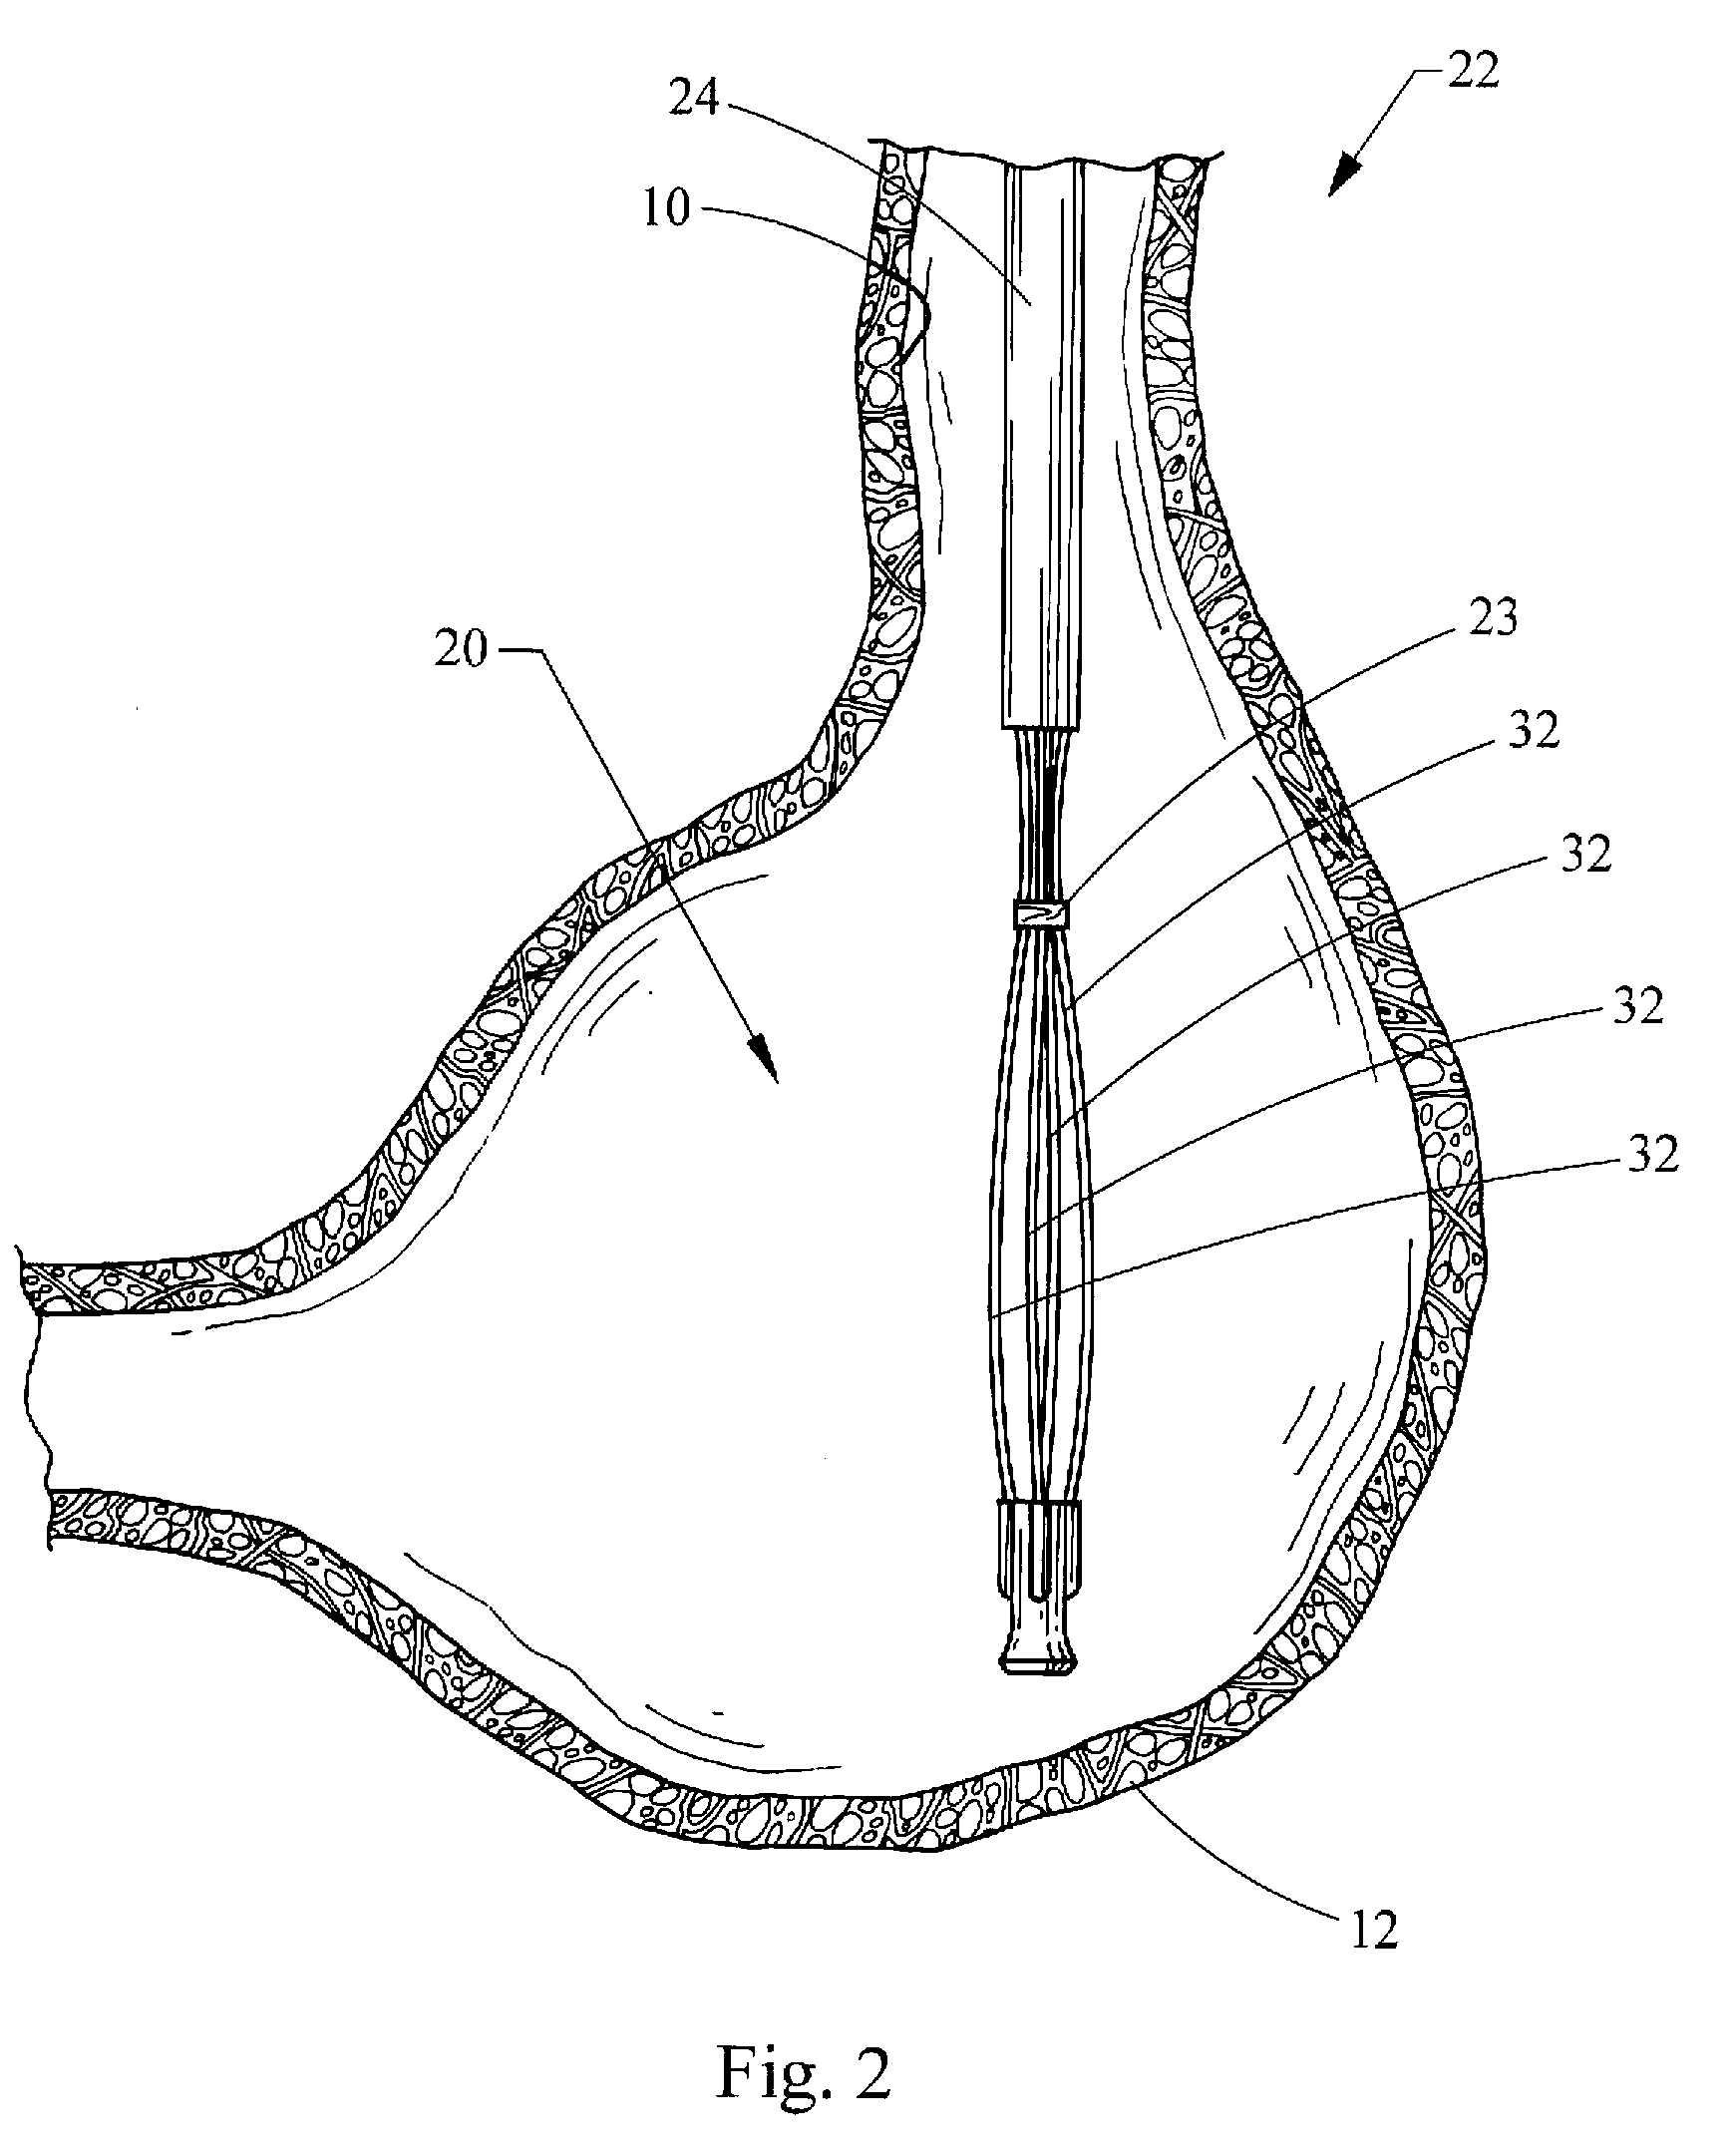 Medical devices, systems and methods for closing perforations